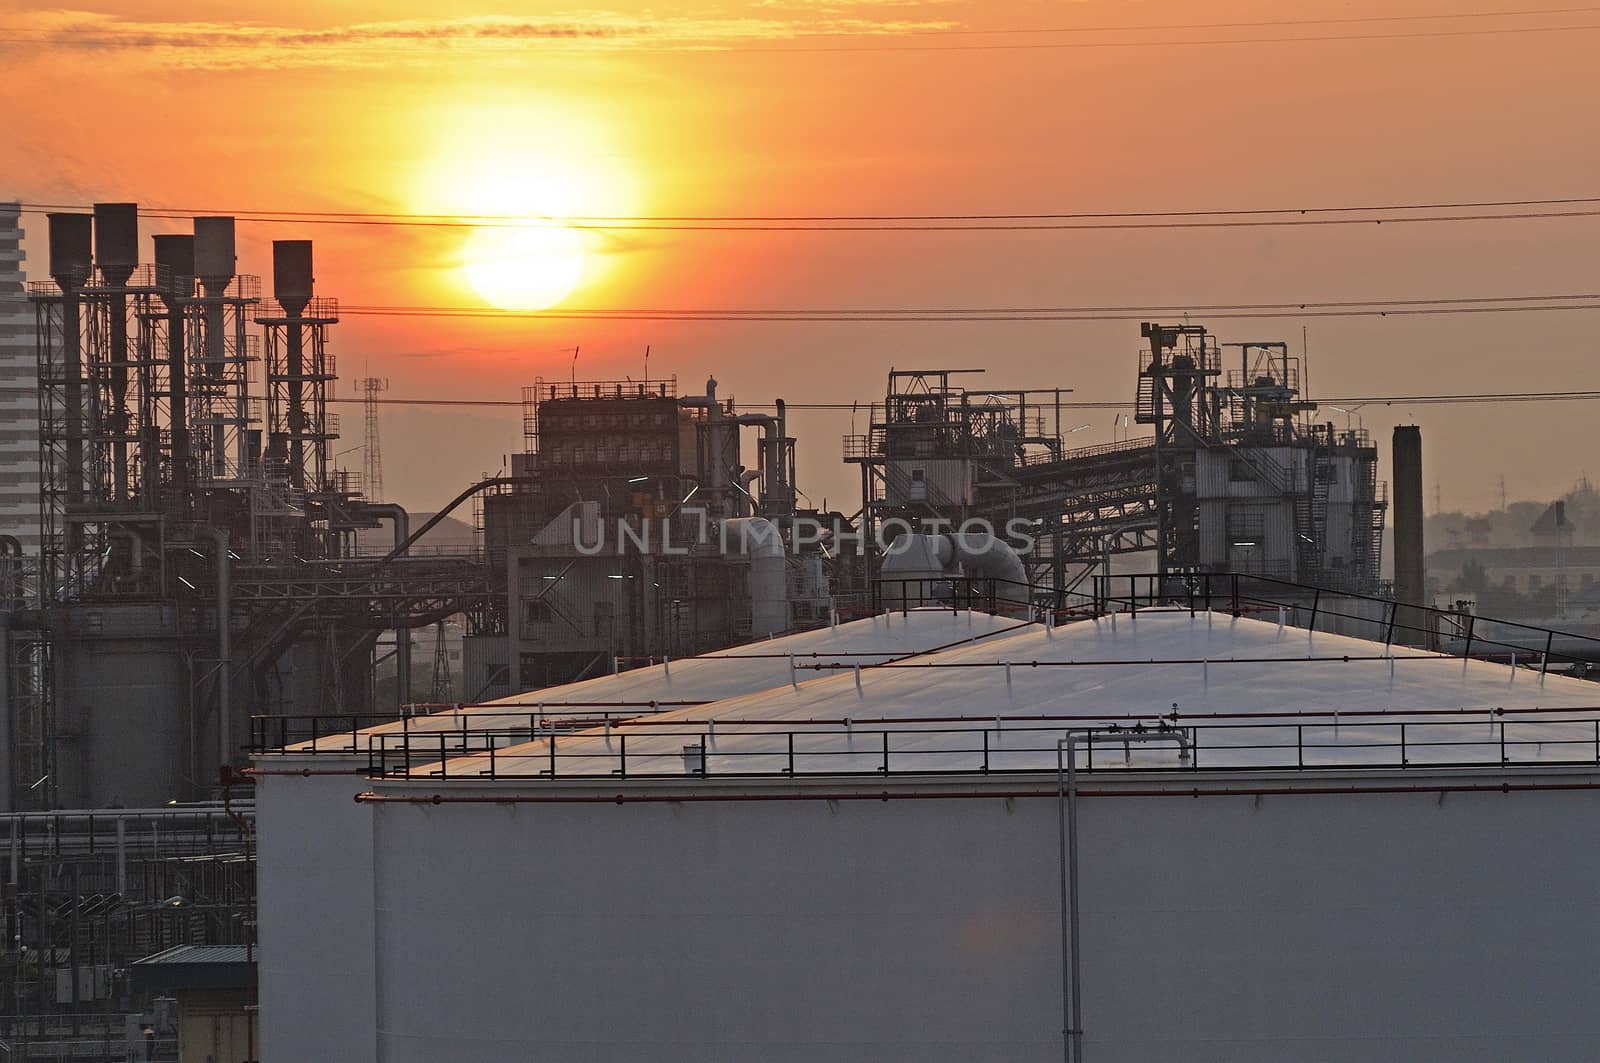 Oil Refinery factory at sunset by think4photop